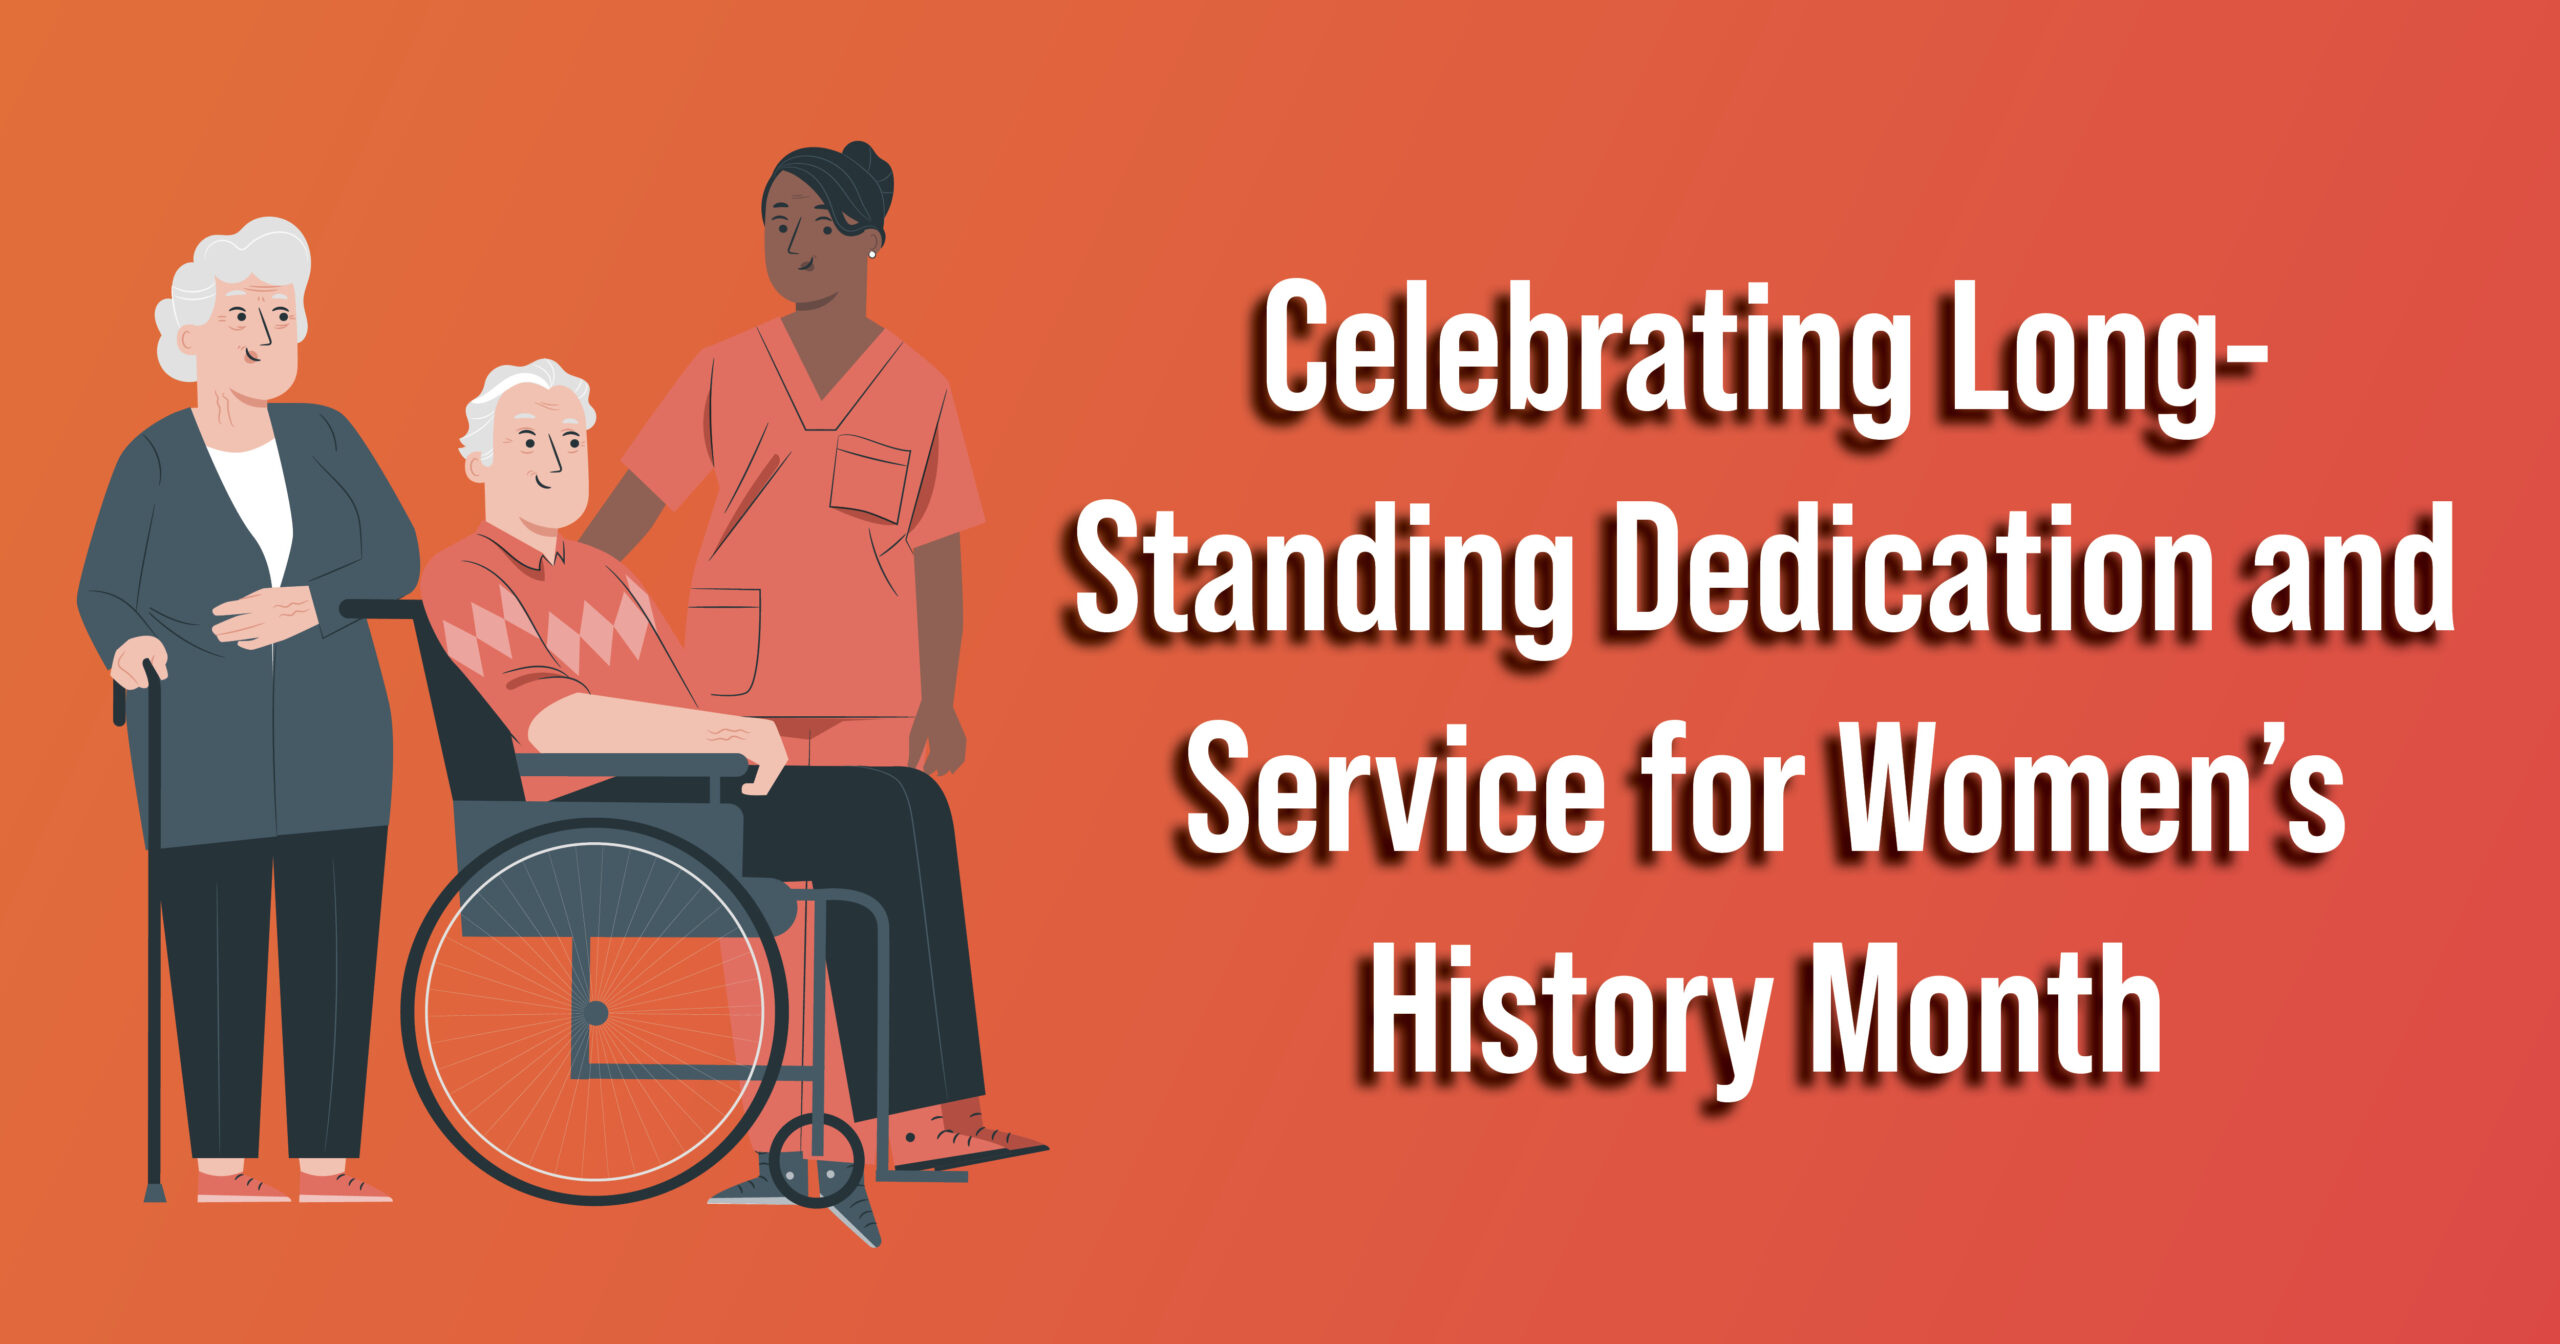 Celebrating Long-Standing Dedication and Service for Women’s History Month